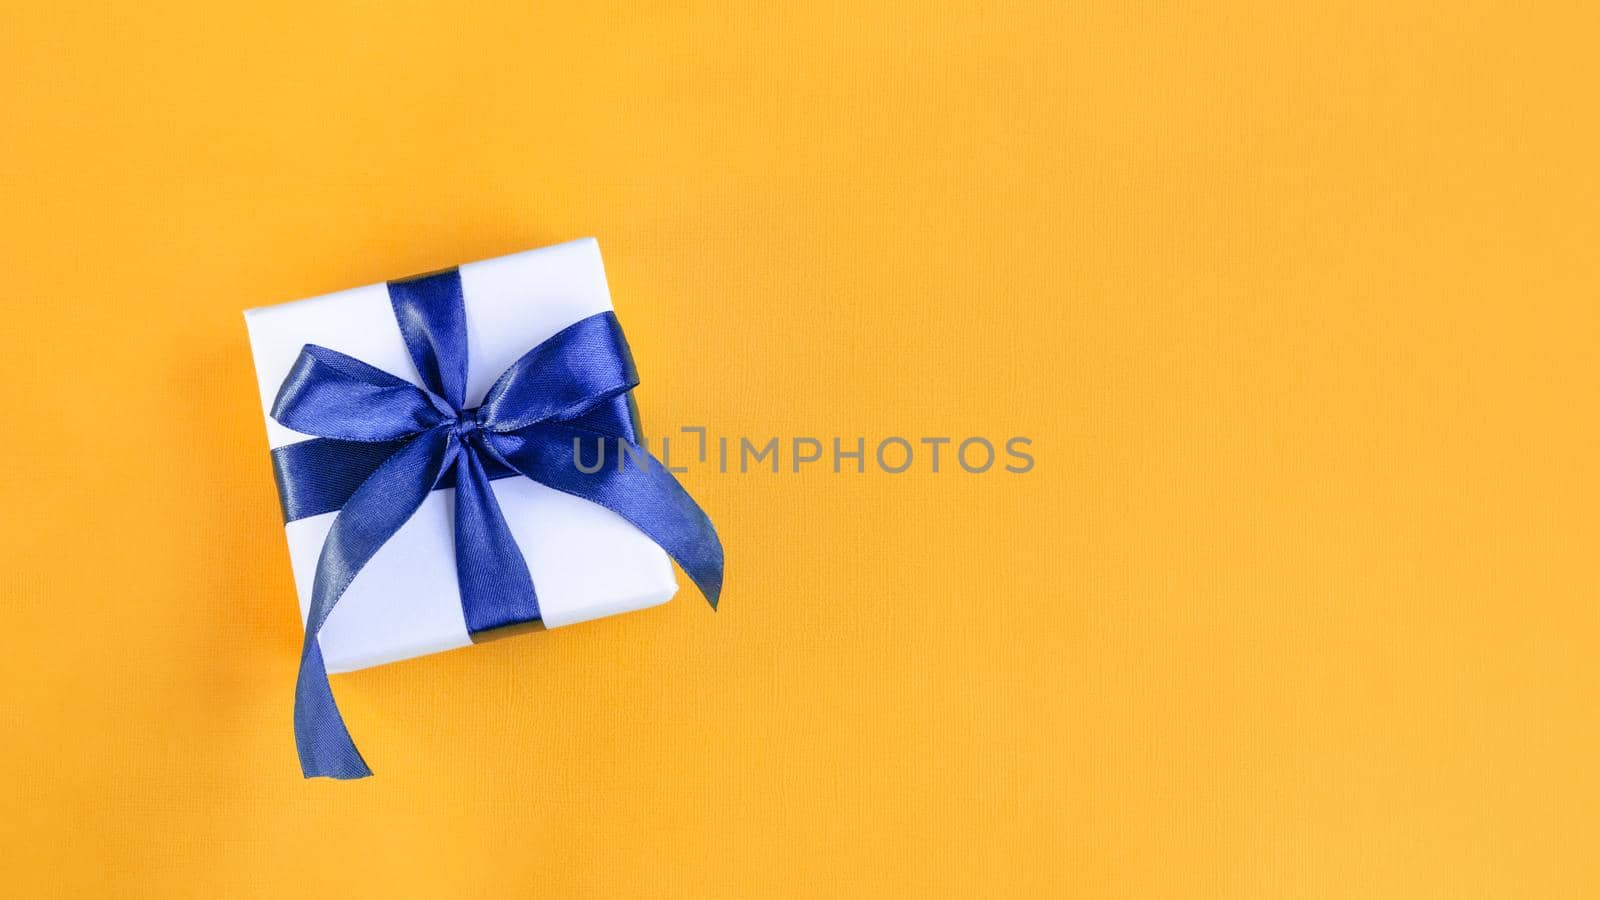 Banner of a Gift wrapped in white paper with a blue bow made of satin on festive yellow orange background by lavsketch